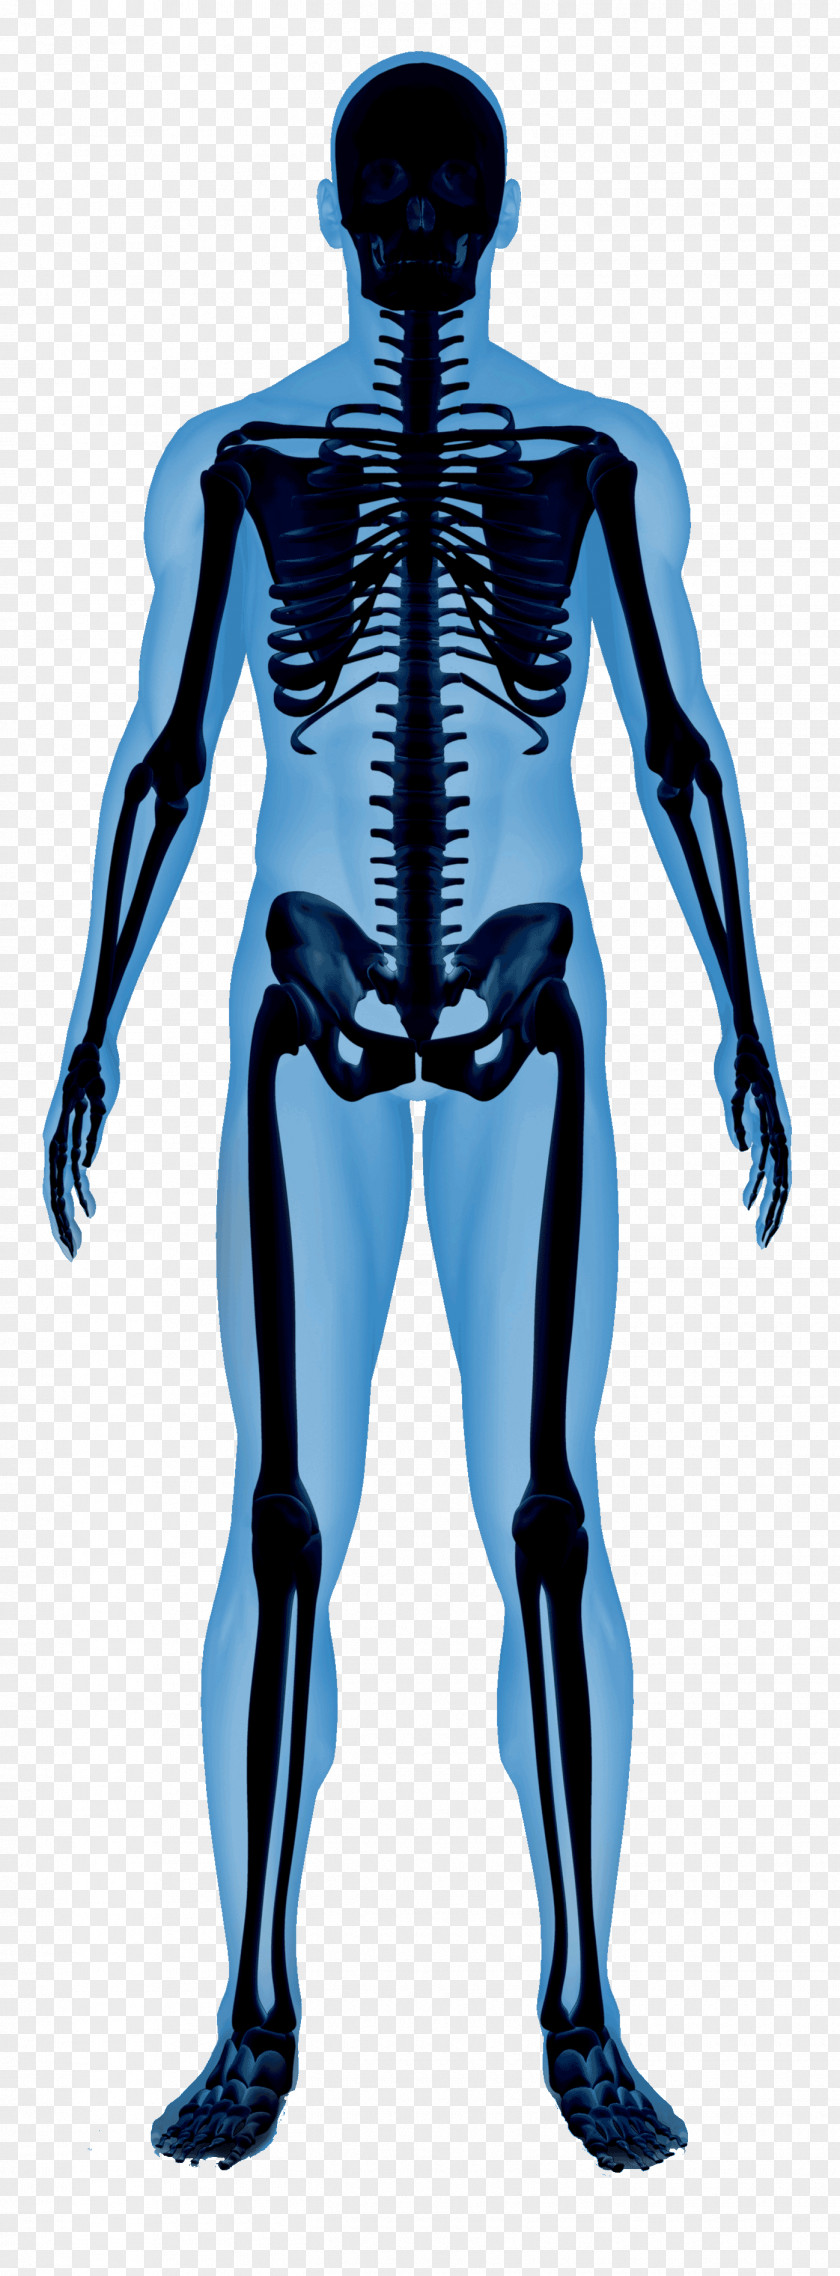 Skeleton Human Essential Of Anatomy And Physiology Body PNG